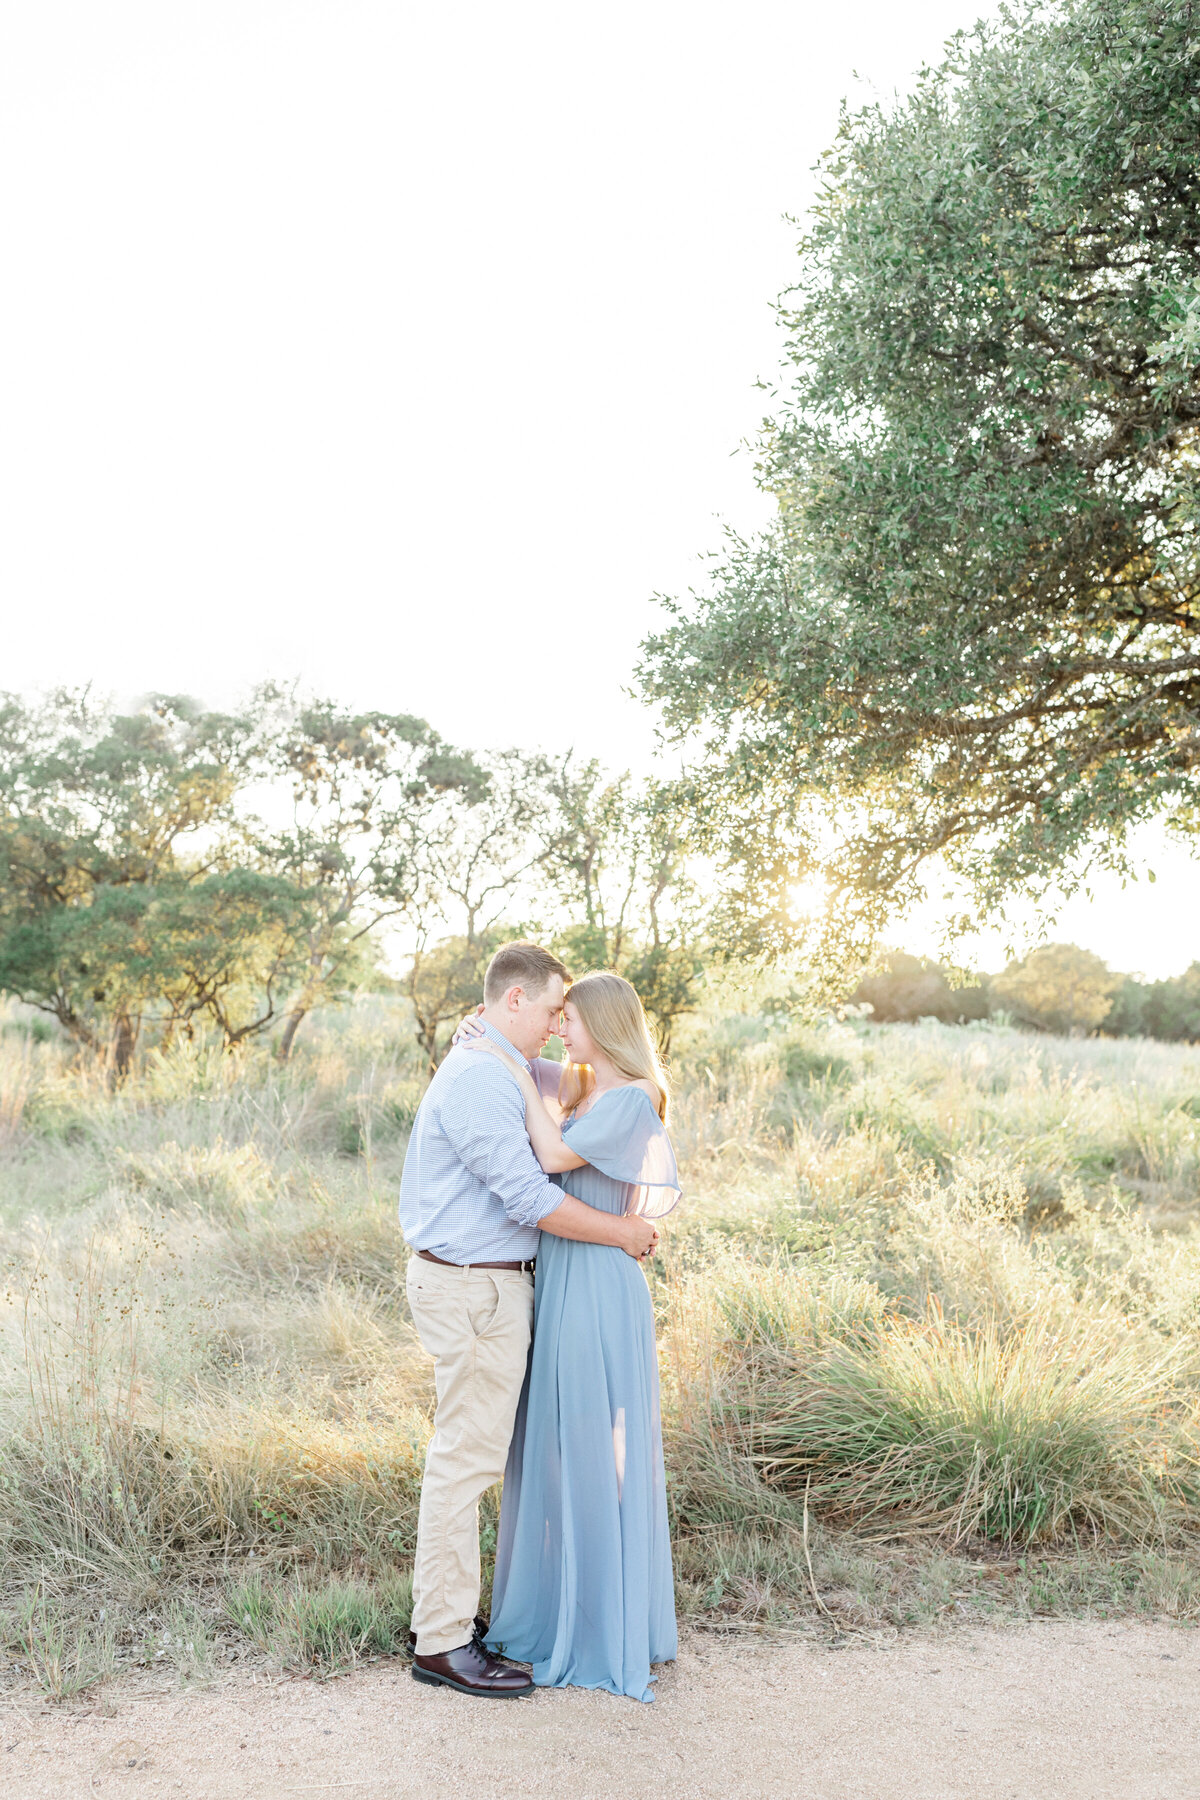 Jessica Chole Photography San Antonio Texas California Wedding Portrait Engagement Maternity Family Lifestyle Photographer Souther Cali TX CA Light Airy Bright Colorful Photography28